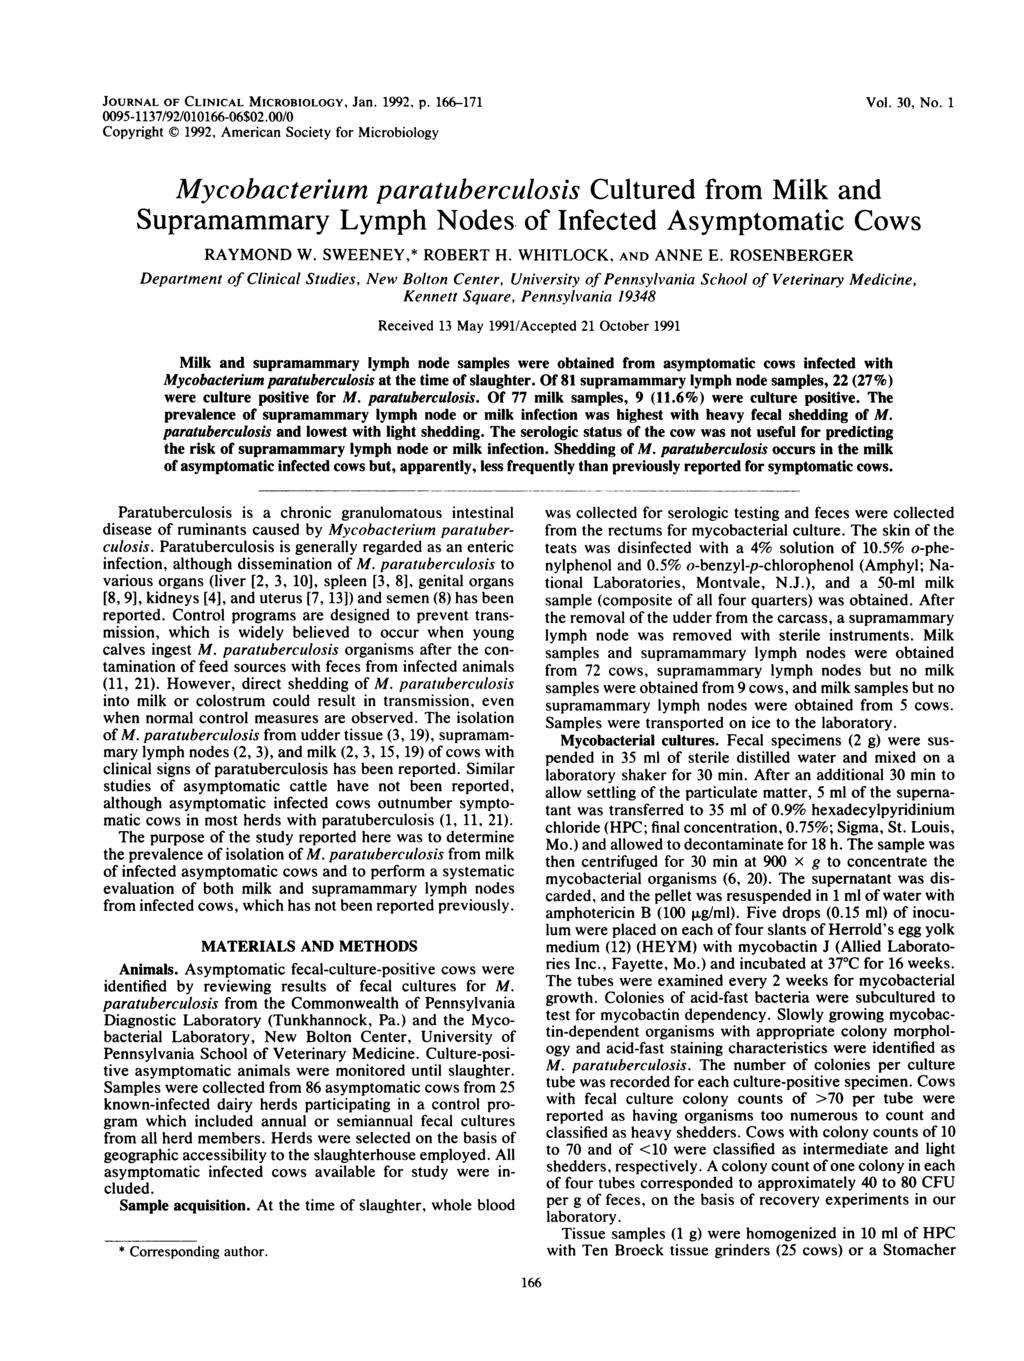 JOURNAL OF CLINICAL MICROBIOLOGY, Jn. 1992, p. 6-171 95-1137/92/16-6$2./ Copyright C 1992, Americn Society for Microbiology Vol. 3, No.